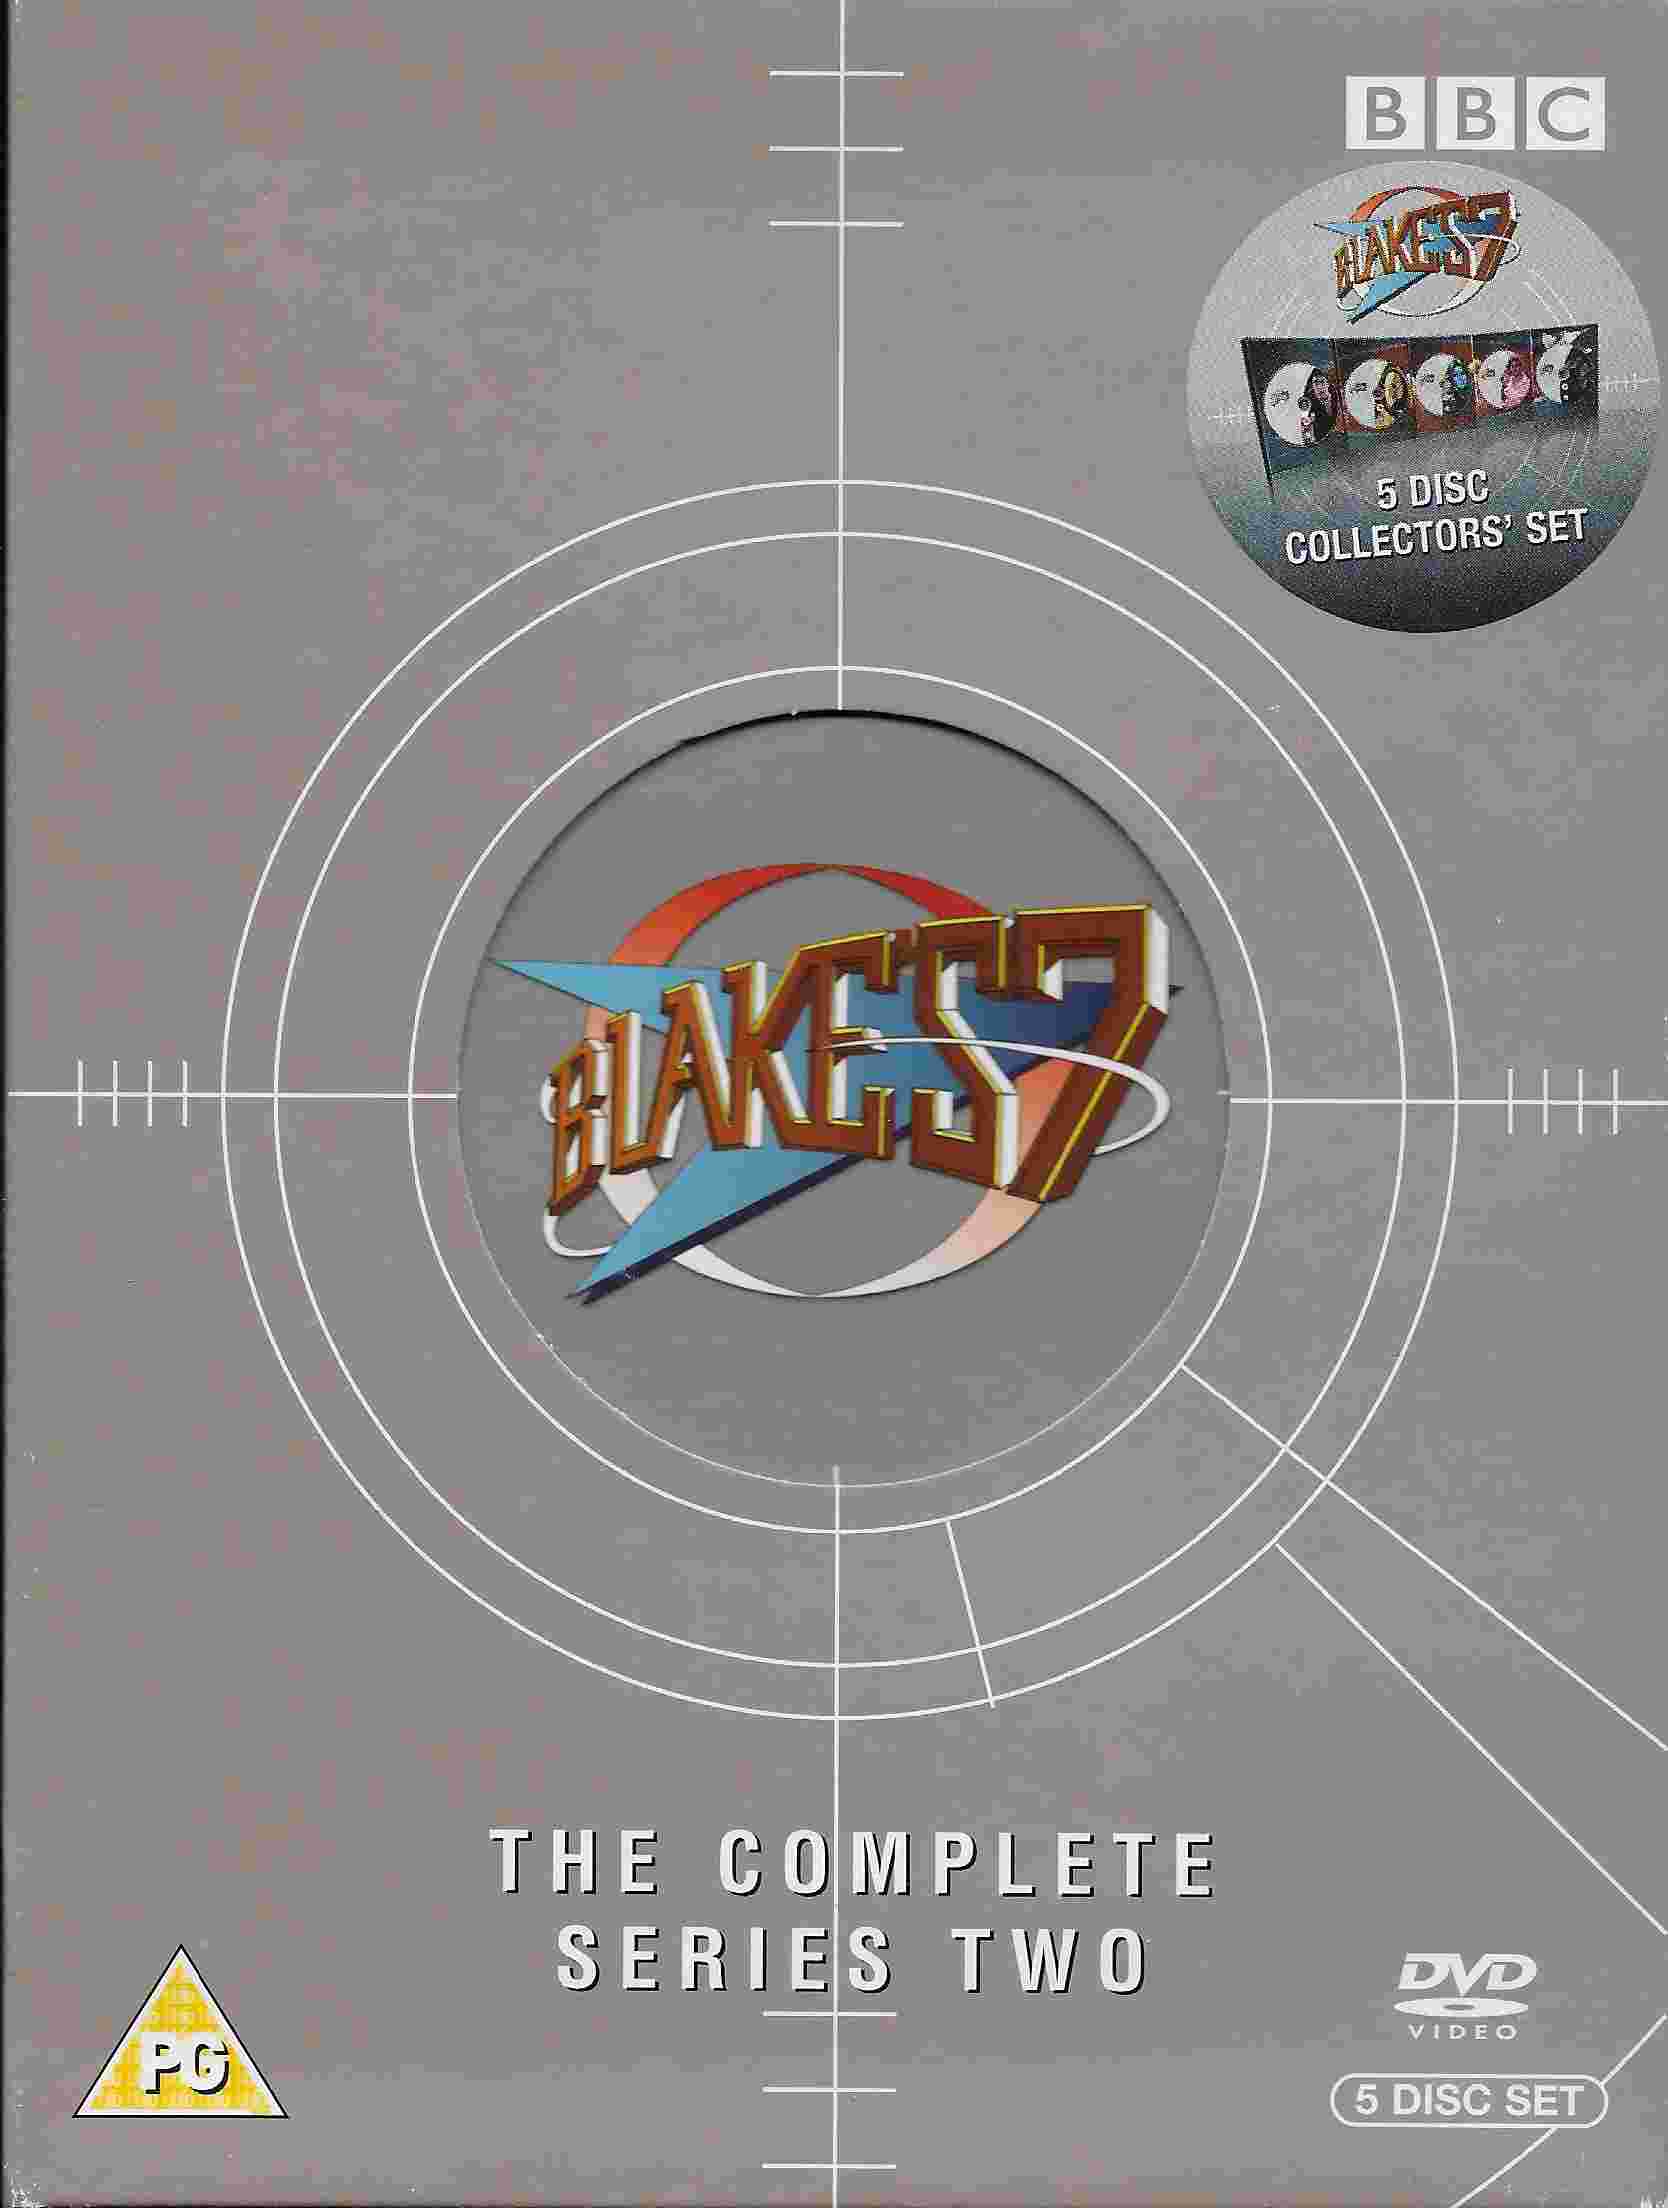 Picture of BBCDVD 1184 Blake's 7 - Series 2 by artist Terry Nation / Chris Boucher / Allan Prior / Robert Holmes / Roger Parkes from the BBC dvds - Records and Tapes library